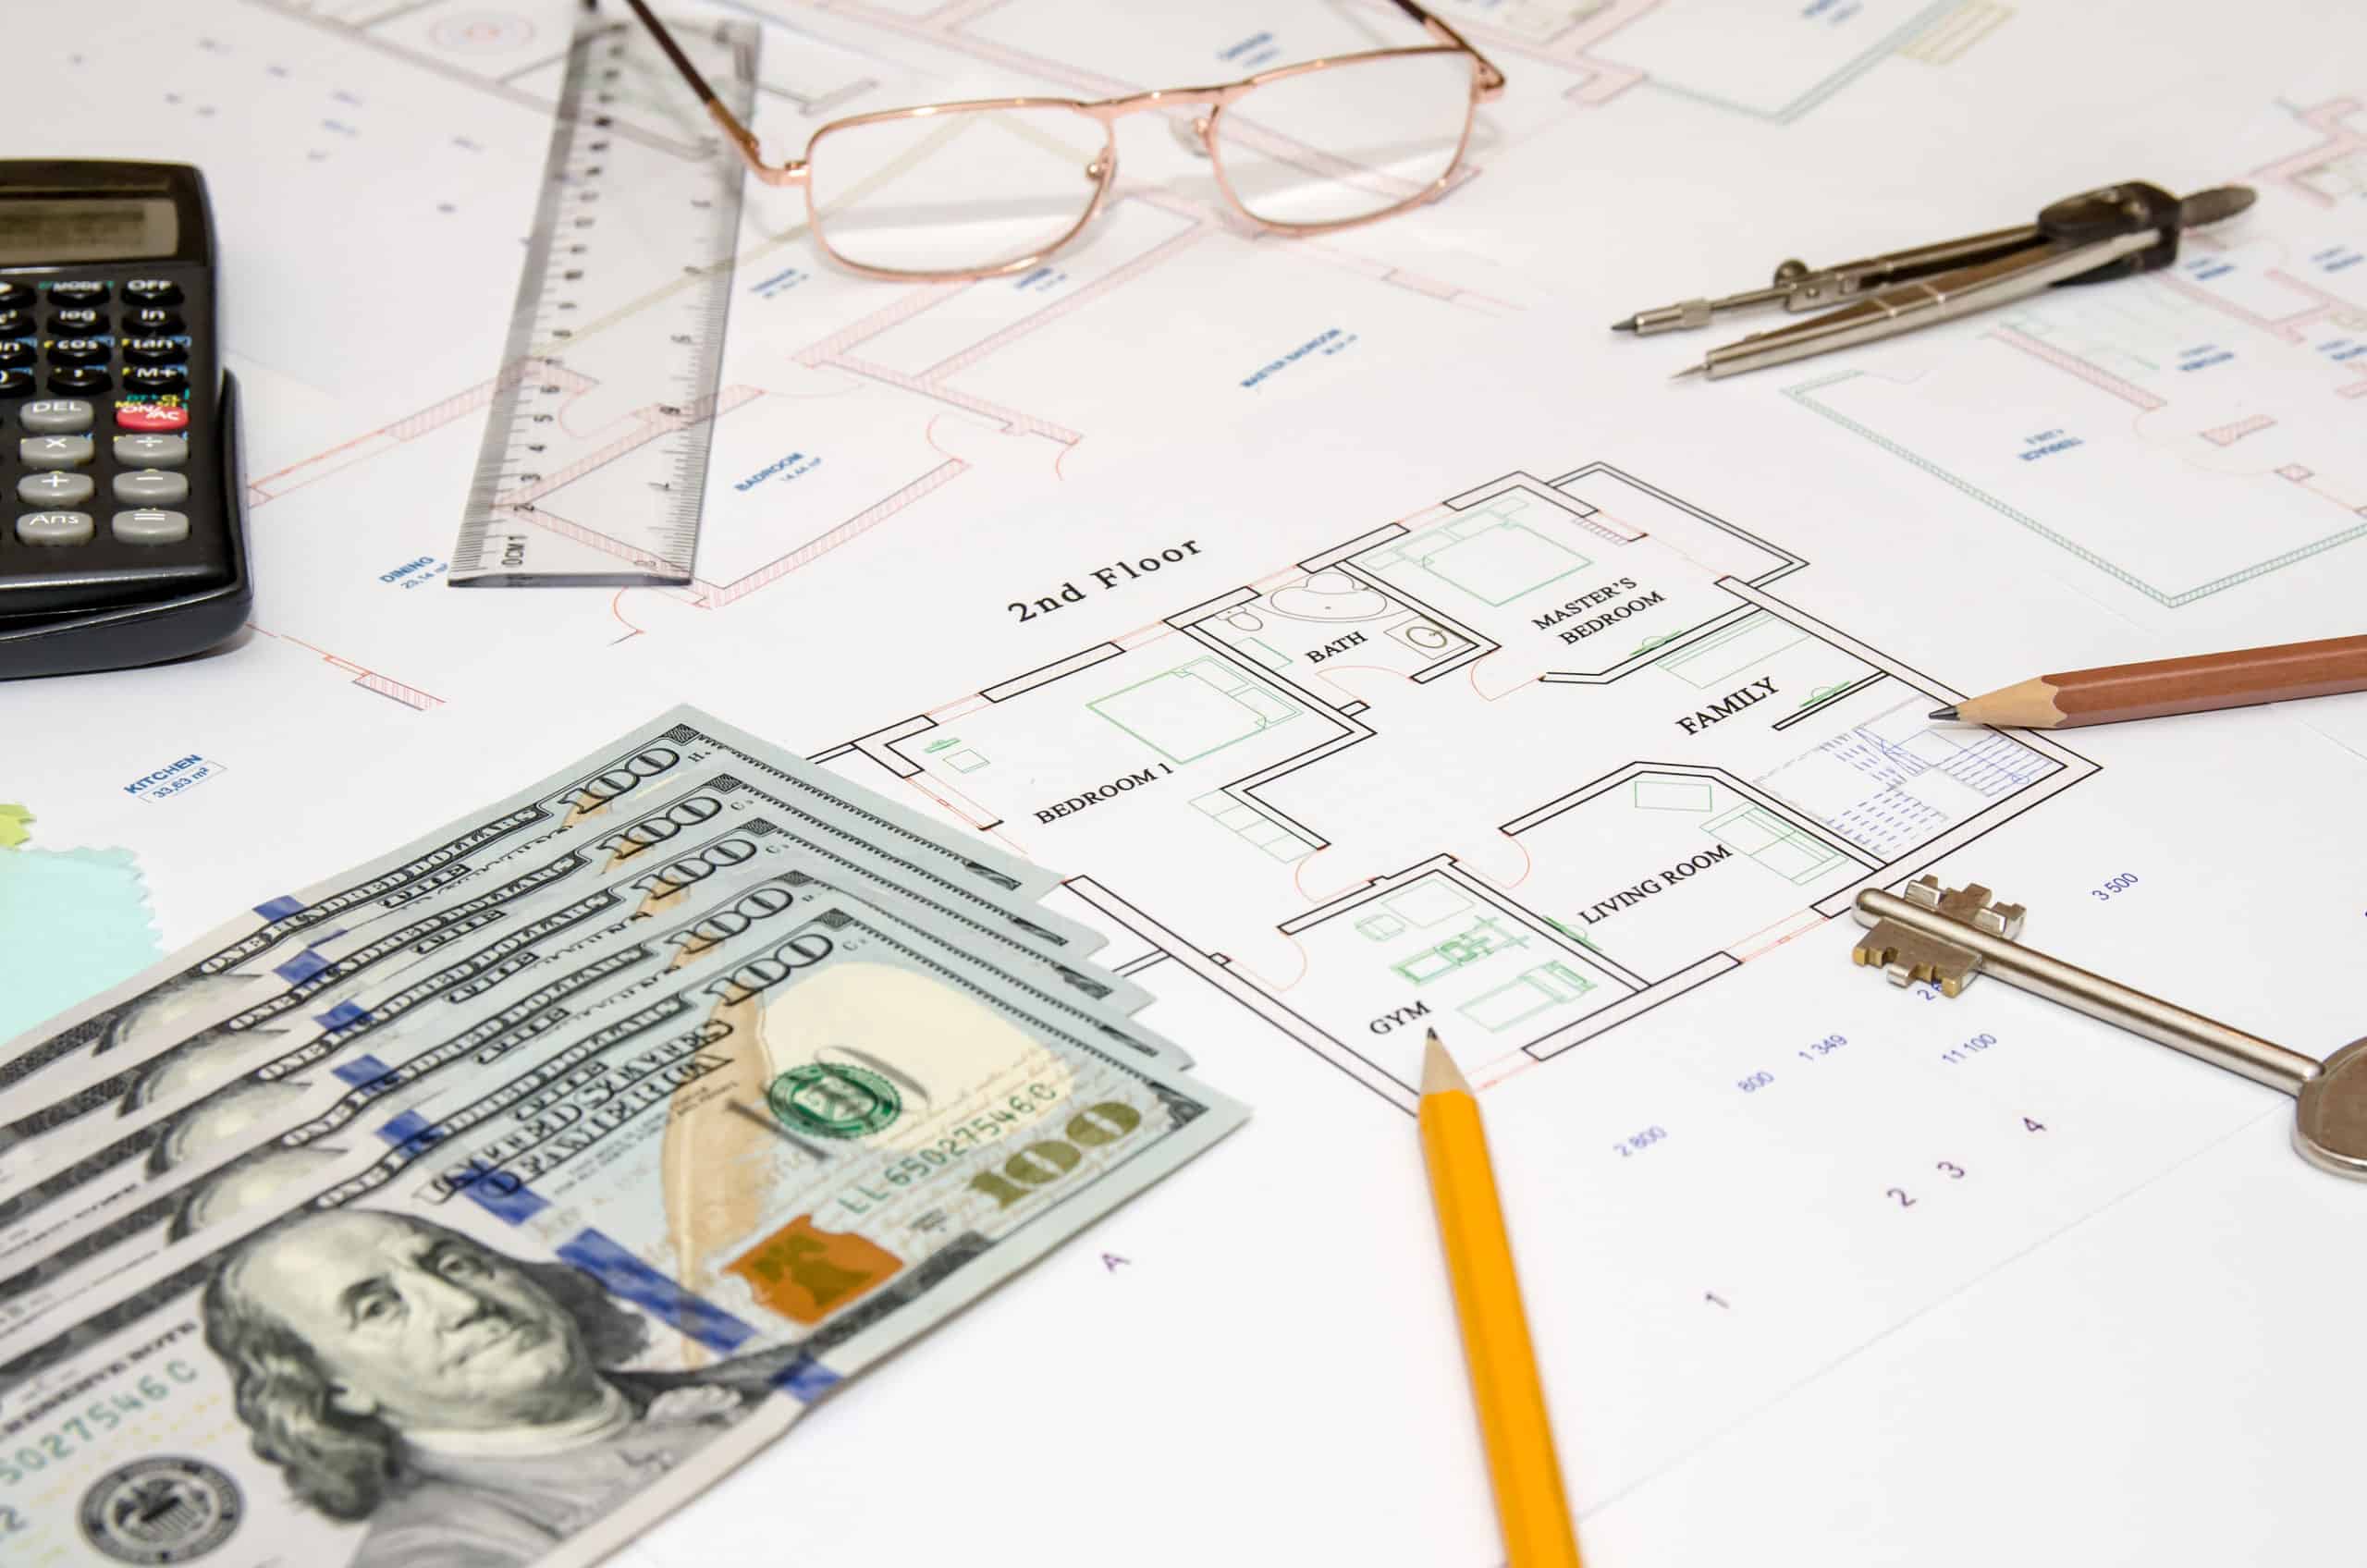 A calculator, a ruler, glasses, a compass, a key, two pencils, and some cash are sitting on top of a blueprint to help consider the question, "how to offer construction funding?"